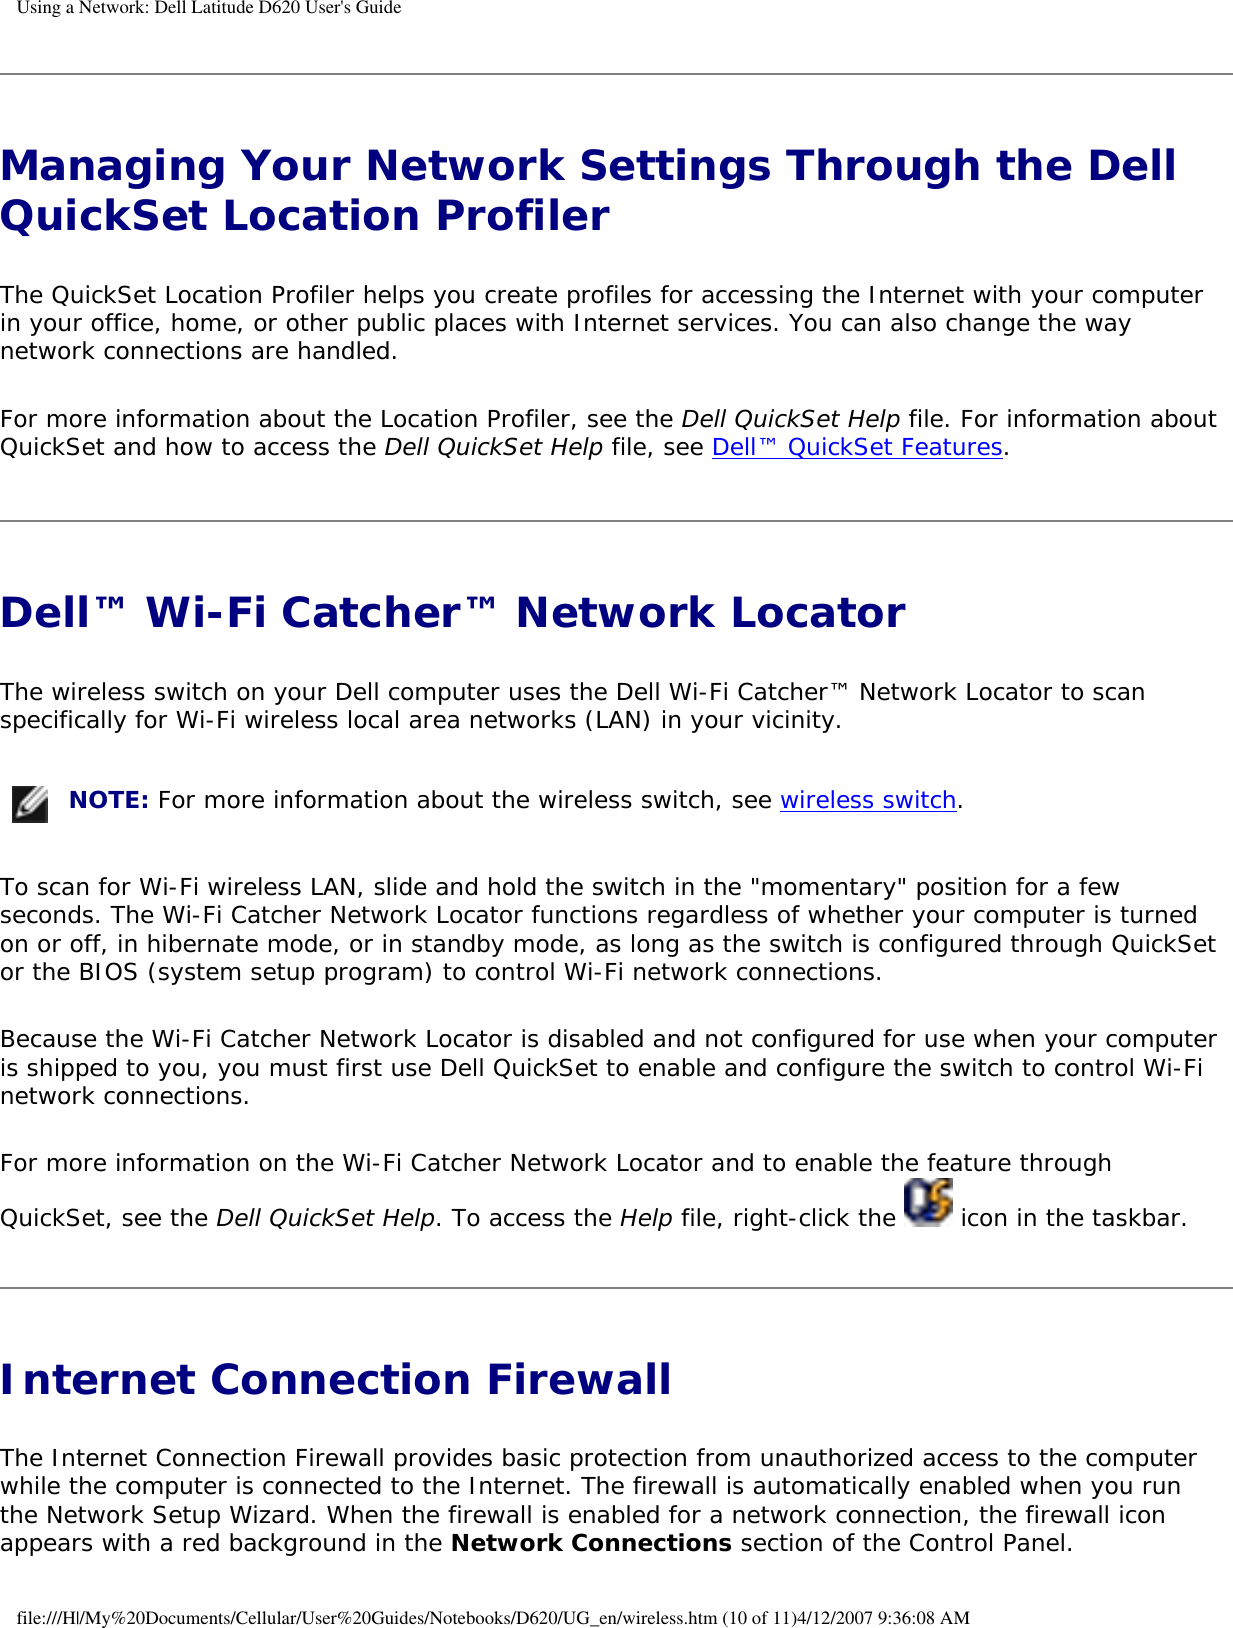 Using a Network: Dell Latitude D620 User&apos;s GuideManaging Your Network Settings Through the Dell QuickSet Location Profiler The QuickSet Location Profiler helps you create profiles for accessing the Internet with your computer in your office, home, or other public places with Internet services. You can also change the way network connections are handled.For more information about the Location Profiler, see the Dell QuickSet Help file. For information about QuickSet and how to access the Dell QuickSet Help file, see Dell™ QuickSet Features.Dell™ Wi-Fi Catcher™ Network Locator The wireless switch on your Dell computer uses the Dell Wi-Fi Catcher™ Network Locator to scan specifically for Wi-Fi wireless local area networks (LAN) in your vicinity.  NOTE: For more information about the wireless switch, see wireless switch.To scan for Wi-Fi wireless LAN, slide and hold the switch in the &quot;momentary&quot; position for a few seconds. The Wi-Fi Catcher Network Locator functions regardless of whether your computer is turned on or off, in hibernate mode, or in standby mode, as long as the switch is configured through QuickSet or the BIOS (system setup program) to control Wi-Fi network connections. Because the Wi-Fi Catcher Network Locator is disabled and not configured for use when your computer is shipped to you, you must first use Dell QuickSet to enable and configure the switch to control Wi-Fi network connections.For more information on the Wi-Fi Catcher Network Locator and to enable the feature through QuickSet, see the Dell QuickSet Help. To access the Help file, right-click the   icon in the taskbar.Internet Connection Firewall The Internet Connection Firewall provides basic protection from unauthorized access to the computer while the computer is connected to the Internet. The firewall is automatically enabled when you run the Network Setup Wizard. When the firewall is enabled for a network connection, the firewall icon appears with a red background in the Network Connections section of the Control Panel. file:///H|/My%20Documents/Cellular/User%20Guides/Notebooks/D620/UG_en/wireless.htm (10 of 11)4/12/2007 9:36:08 AM